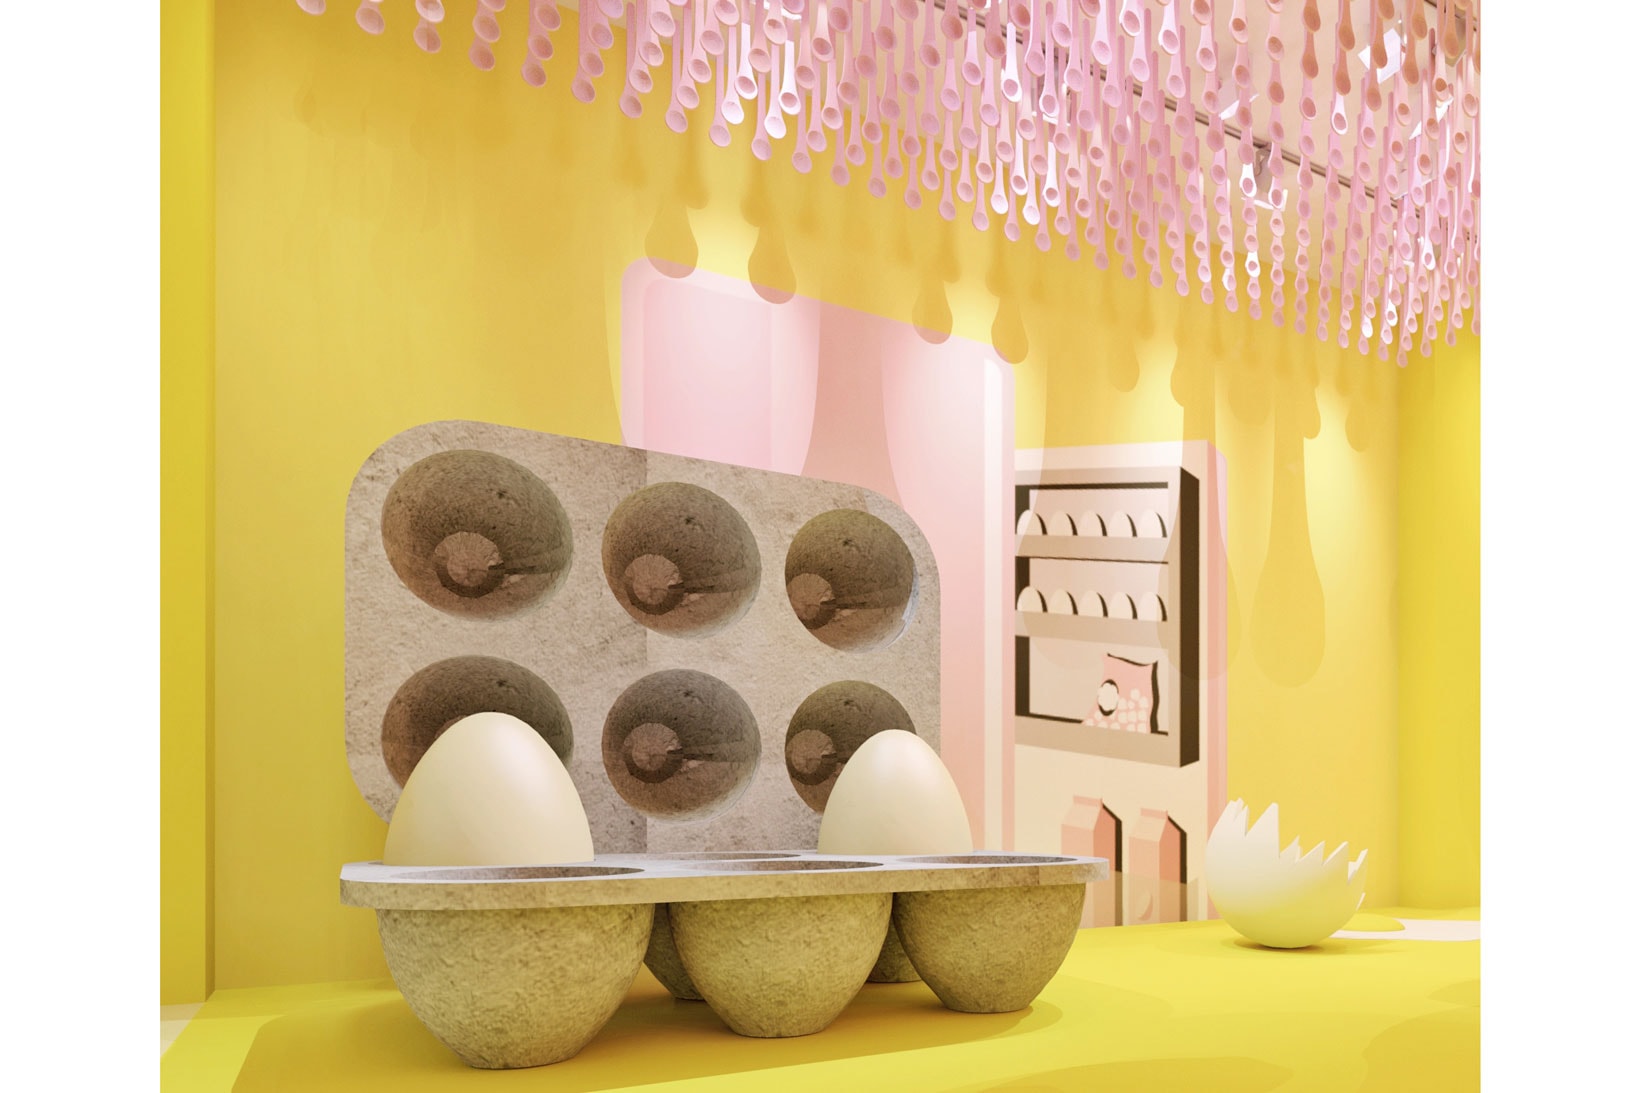 The Egg House New York City Pop Up The Kitchen